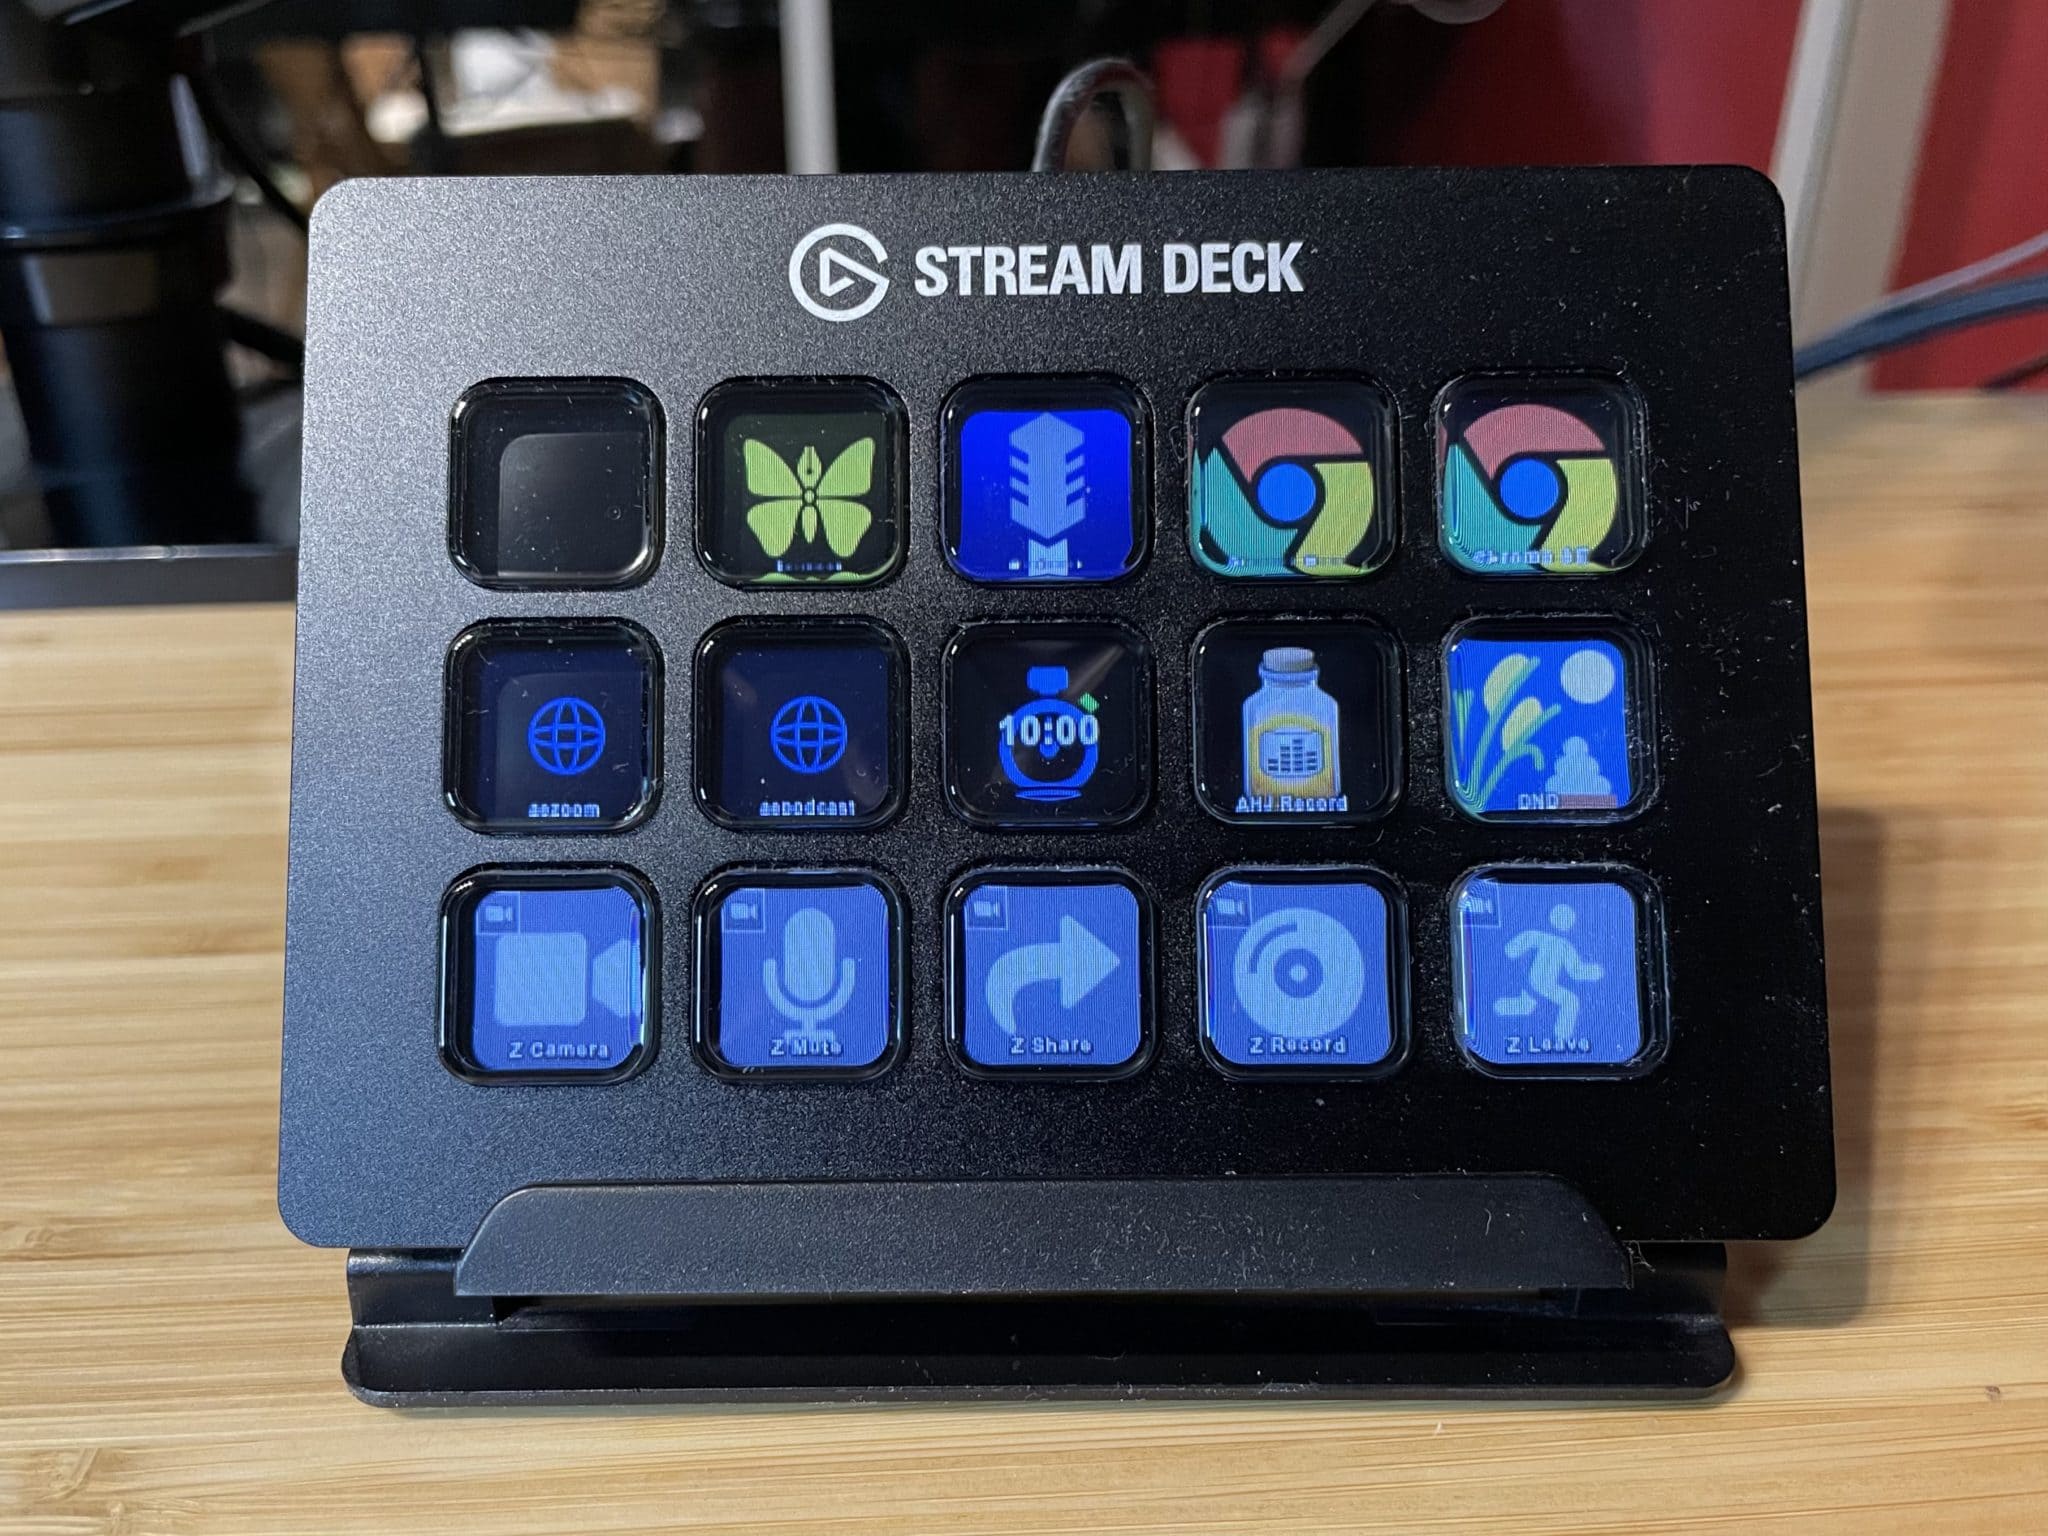 will the stream deck be good